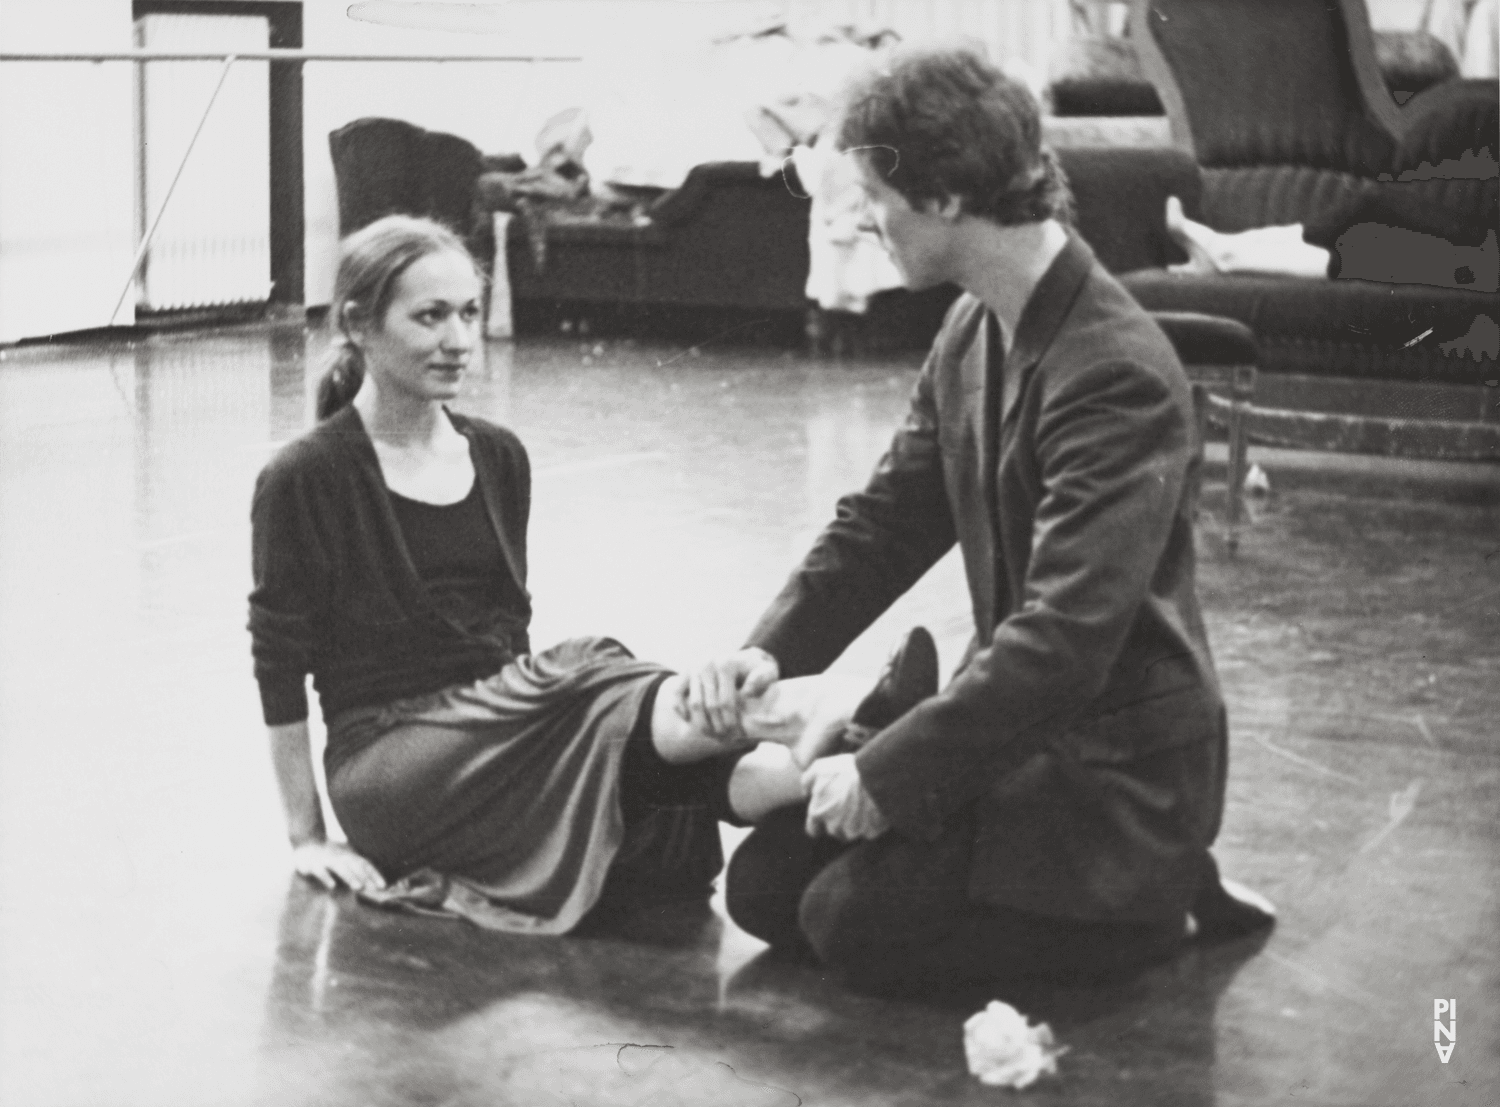 John Giffin and Vivienne Newport in “The Second Spring” by Pina Bausch